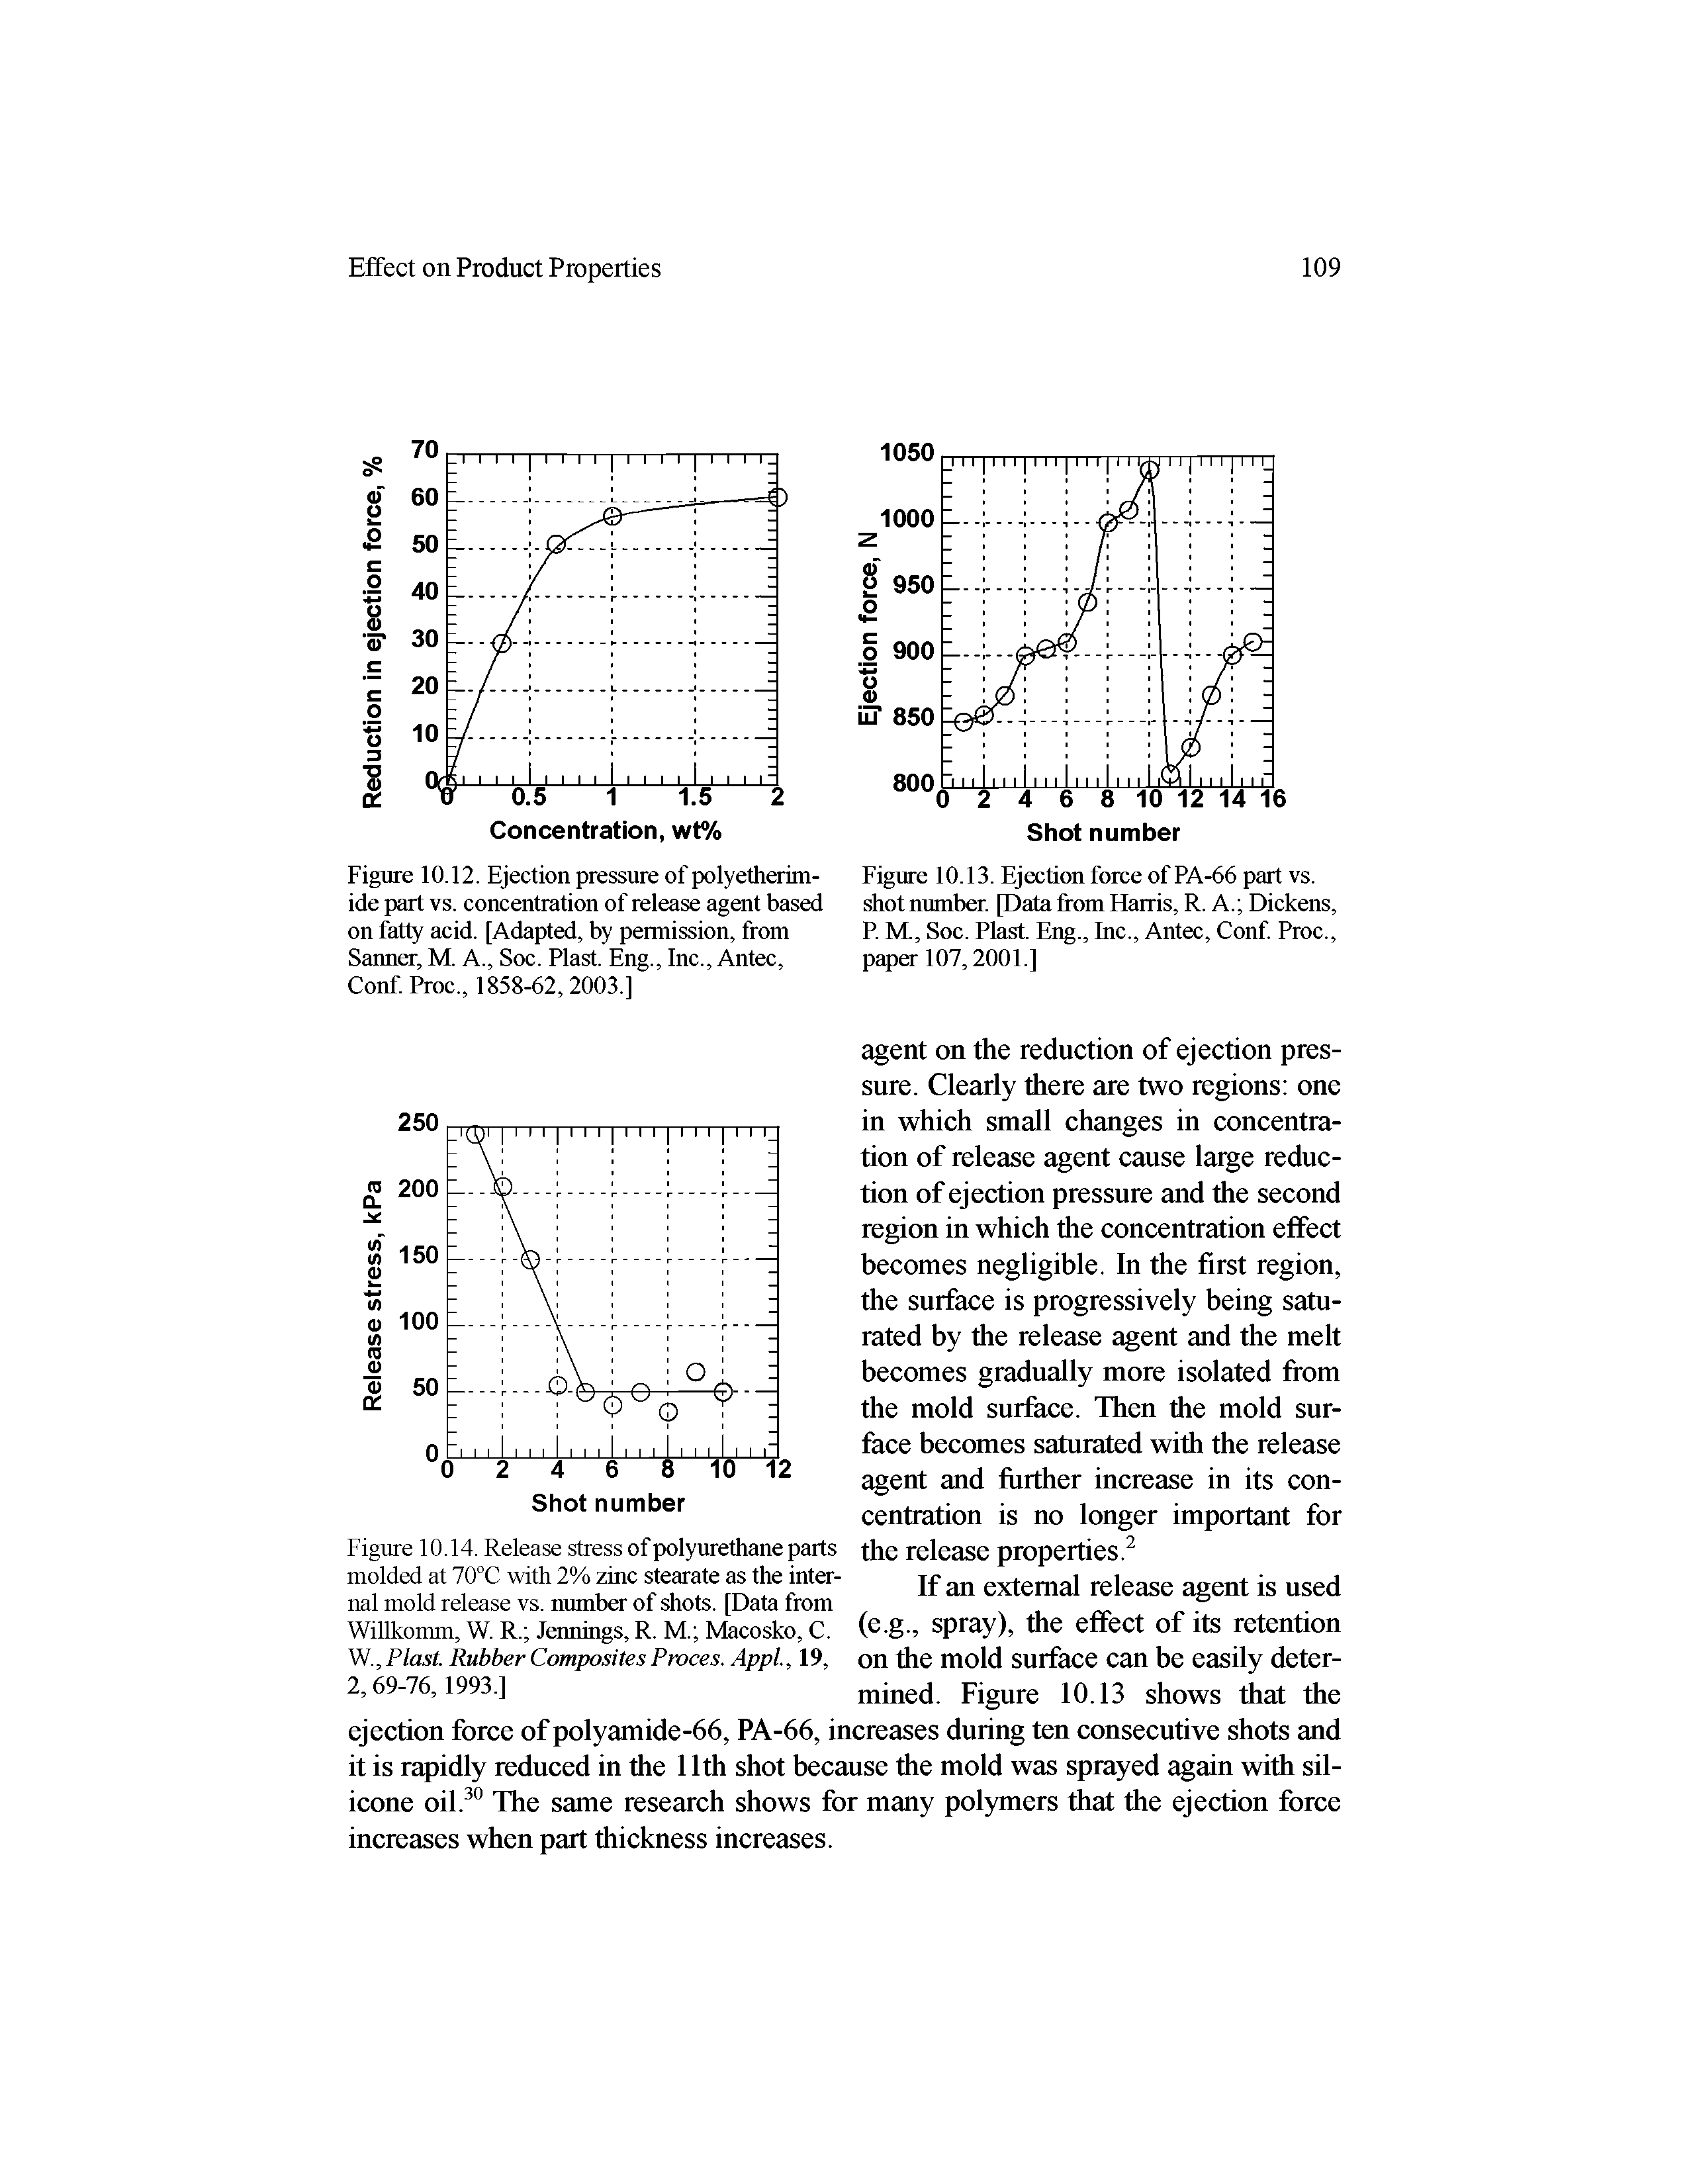 Figure 10.12. Ejection pressure of polyetherim-ide part vs. concentration of release agent based on fatty acid. [Adapted, by permission, from Sanner, M. A., Soc. Plast. Eng., Inc., Antec, Conf. Proc., 1858-62,2003.]...